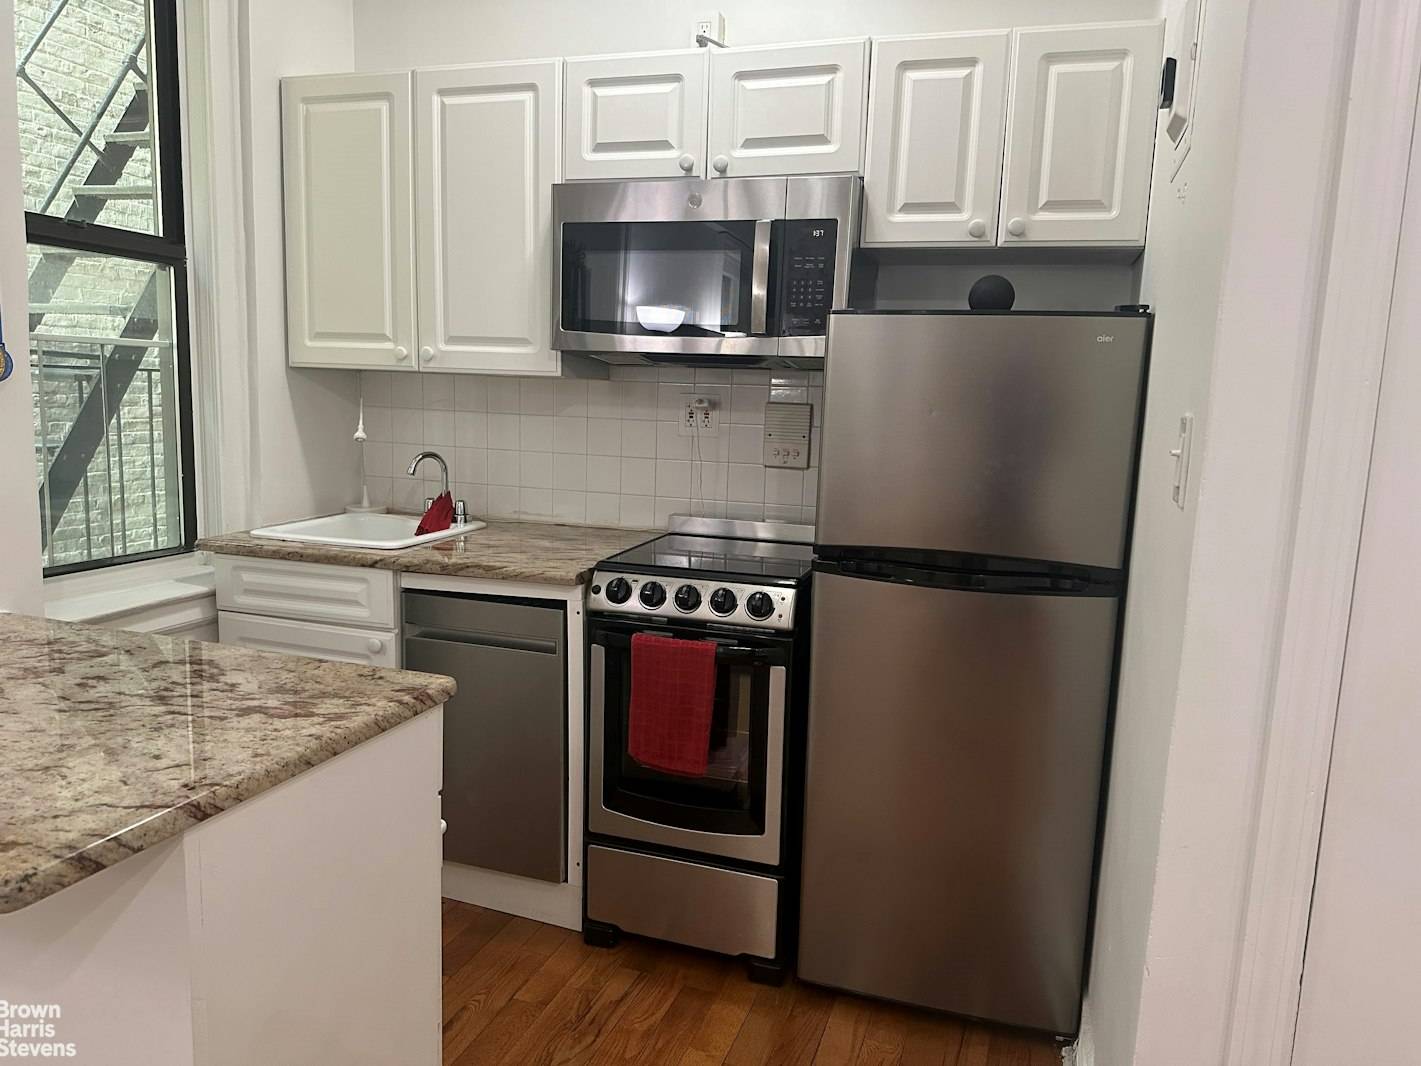 This cozy abode boasts a newly renovated kitchen with sleek stainless steel appliances, white cabinetry, and granite countertops.